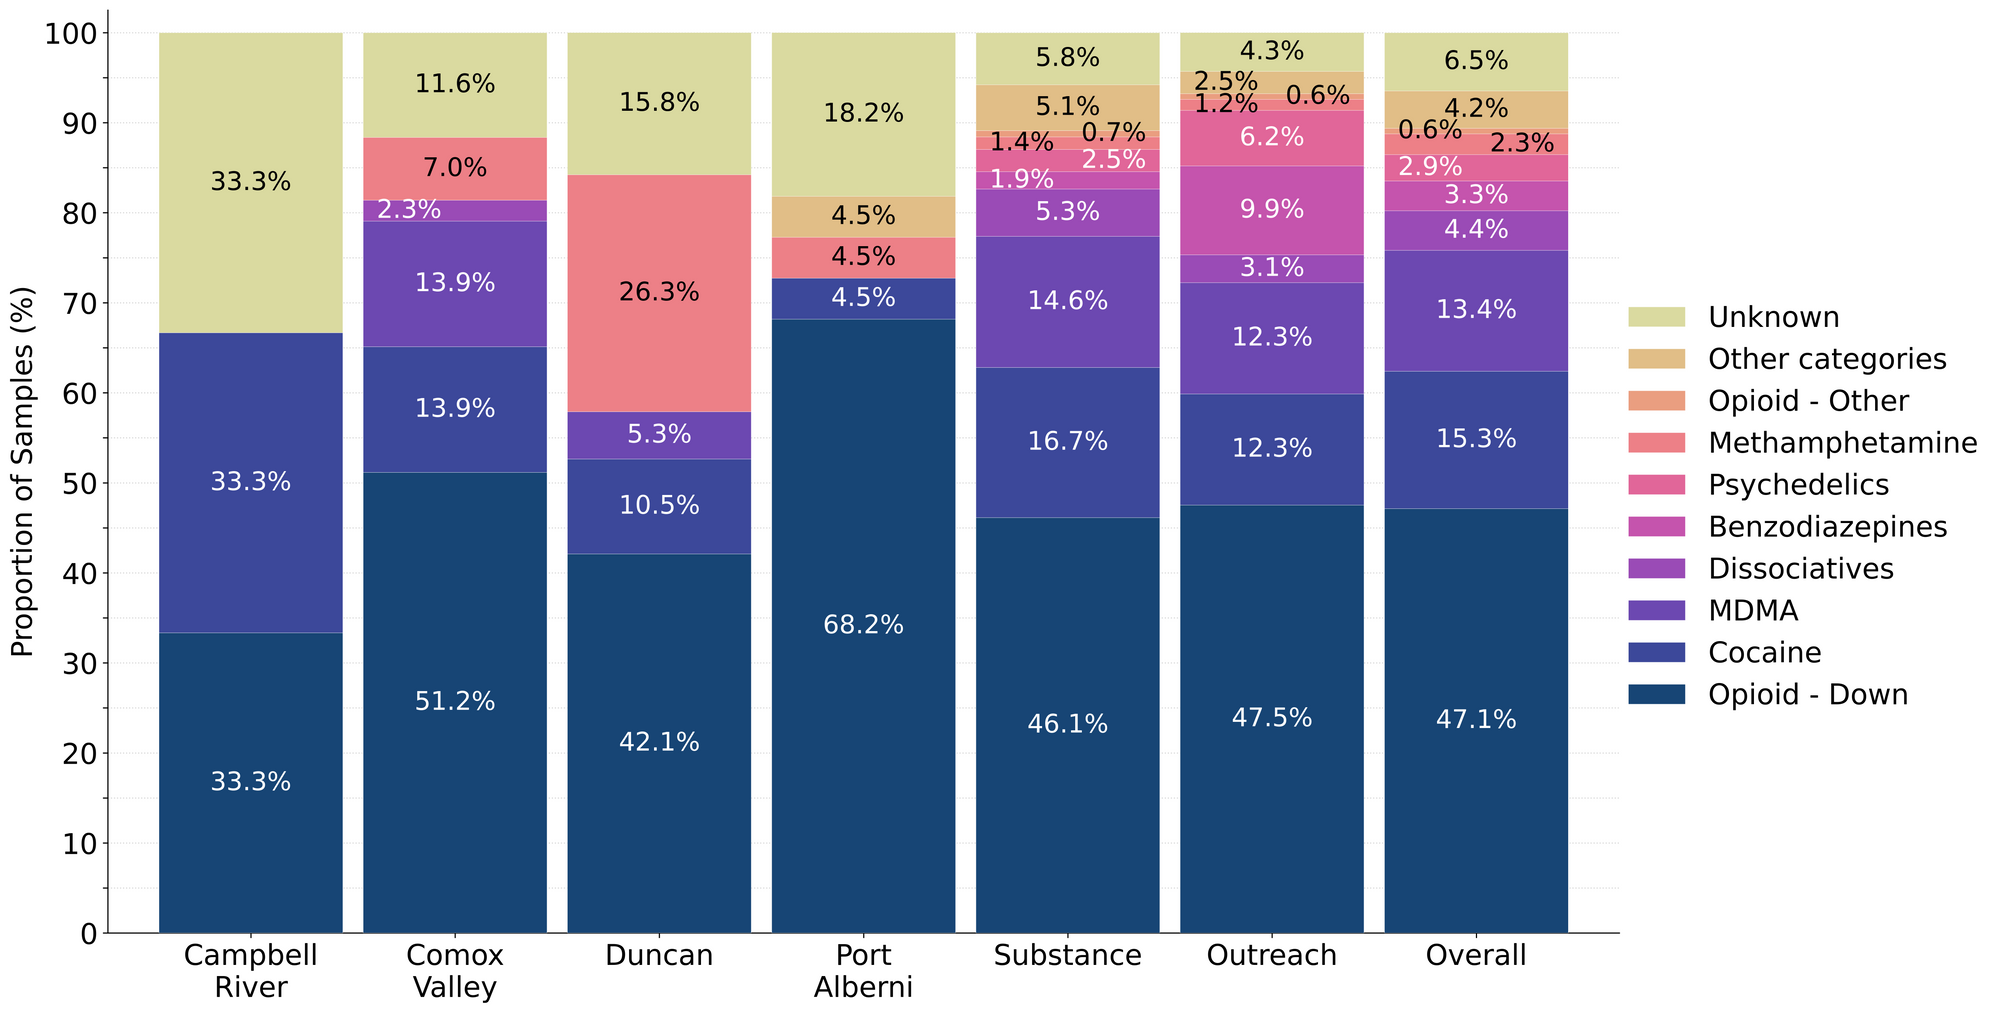 Figure 1. Prevalence of drug classes checked during July split by sample collection/method. Bars are stacked by the percentage of samples in each drug class, with the individual sample counts overlaid.